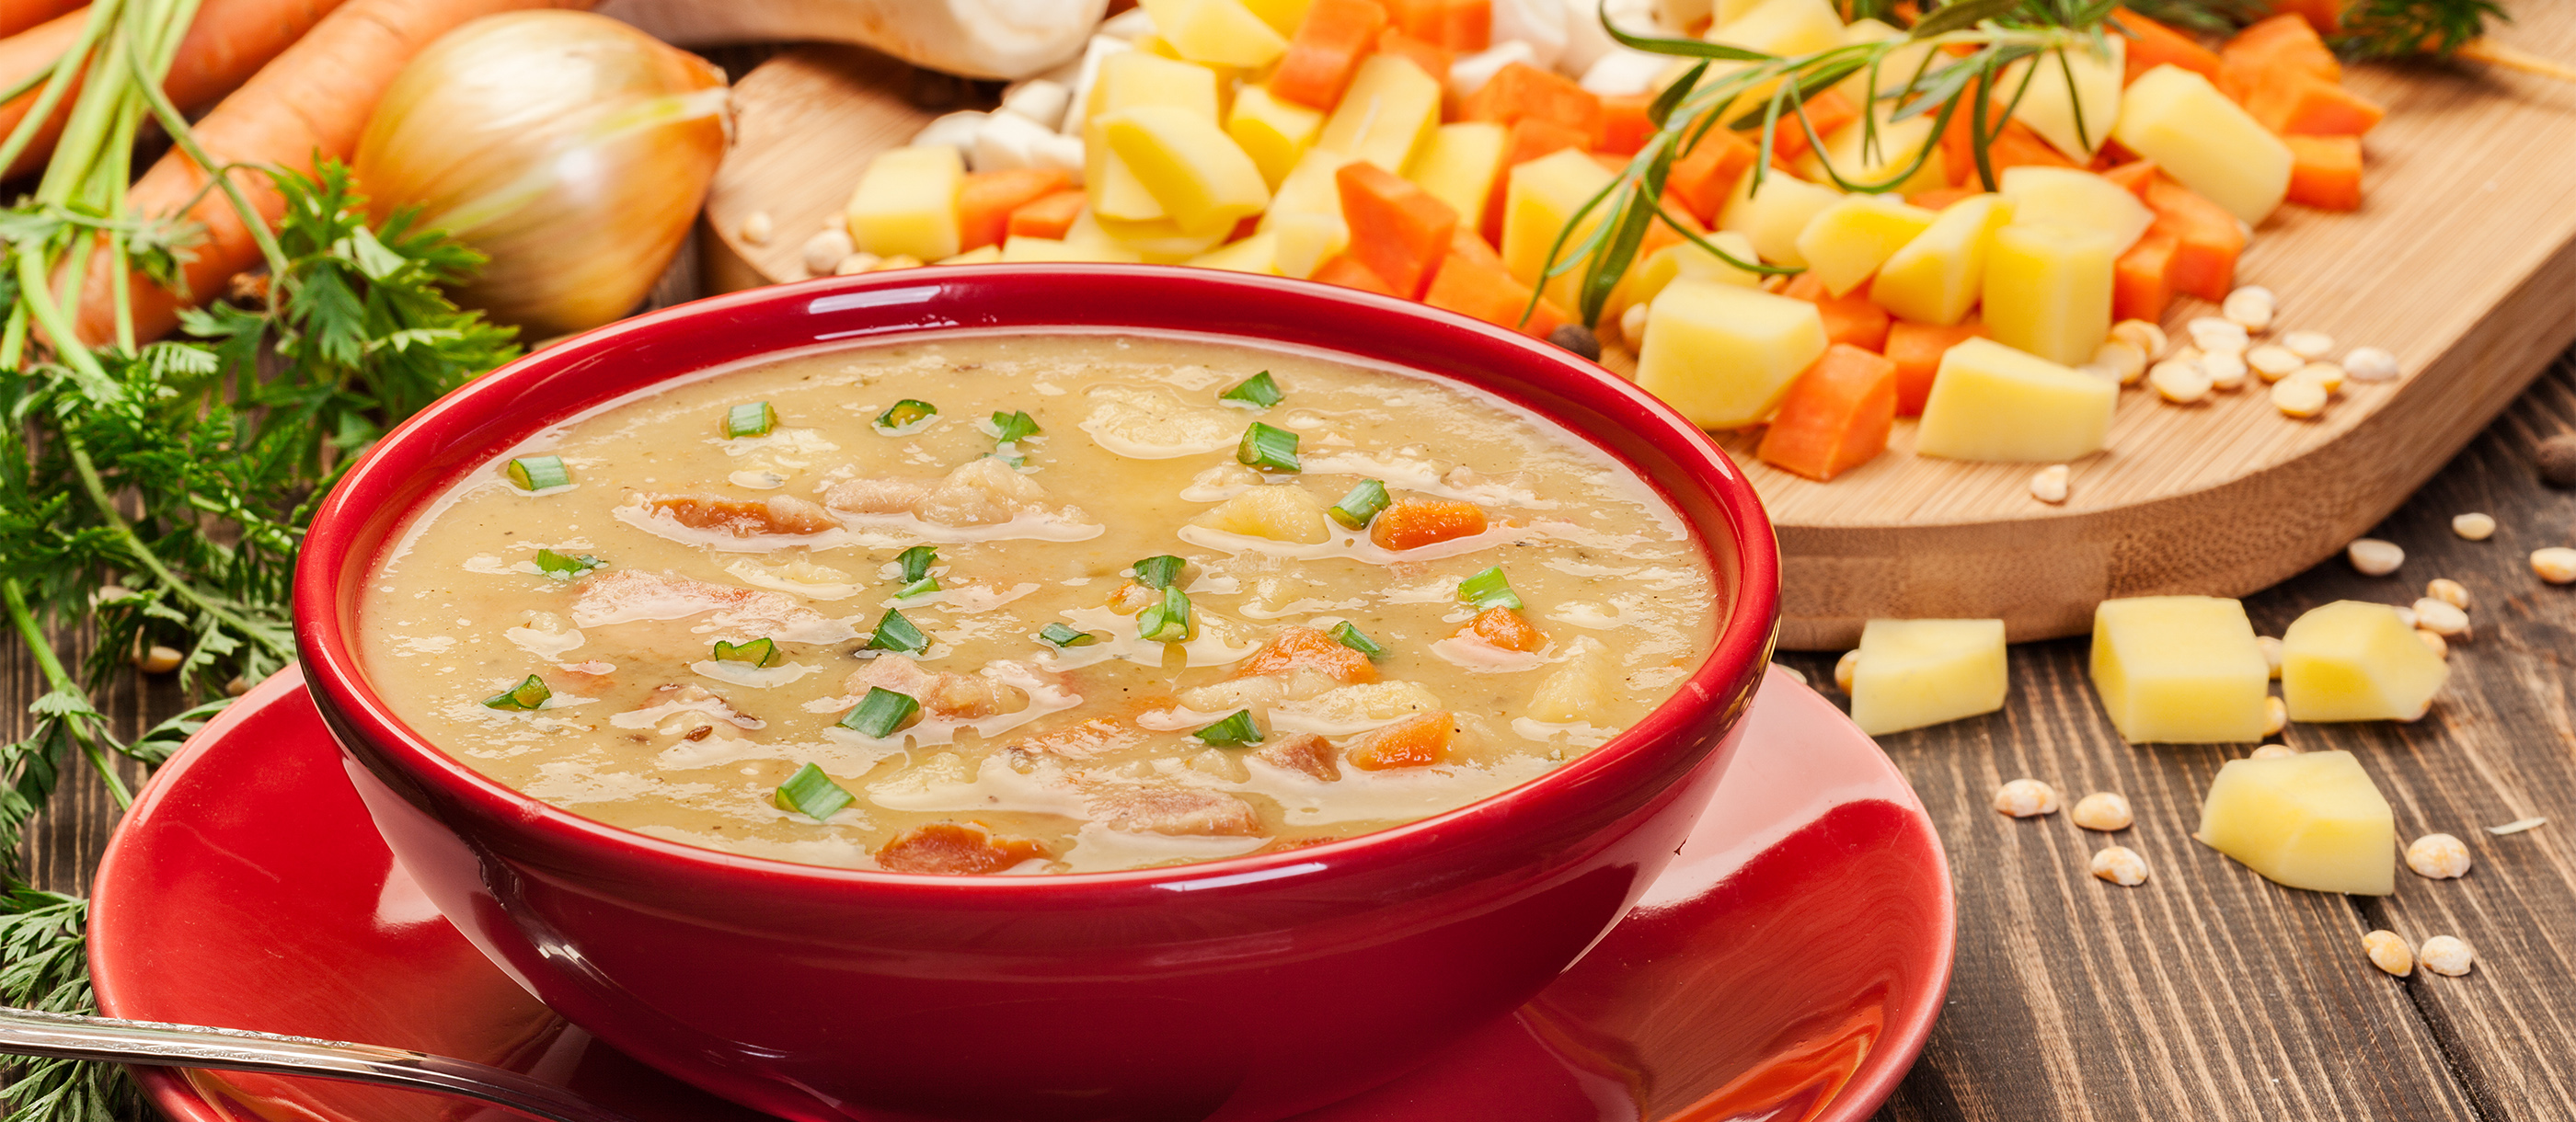 traditional soups